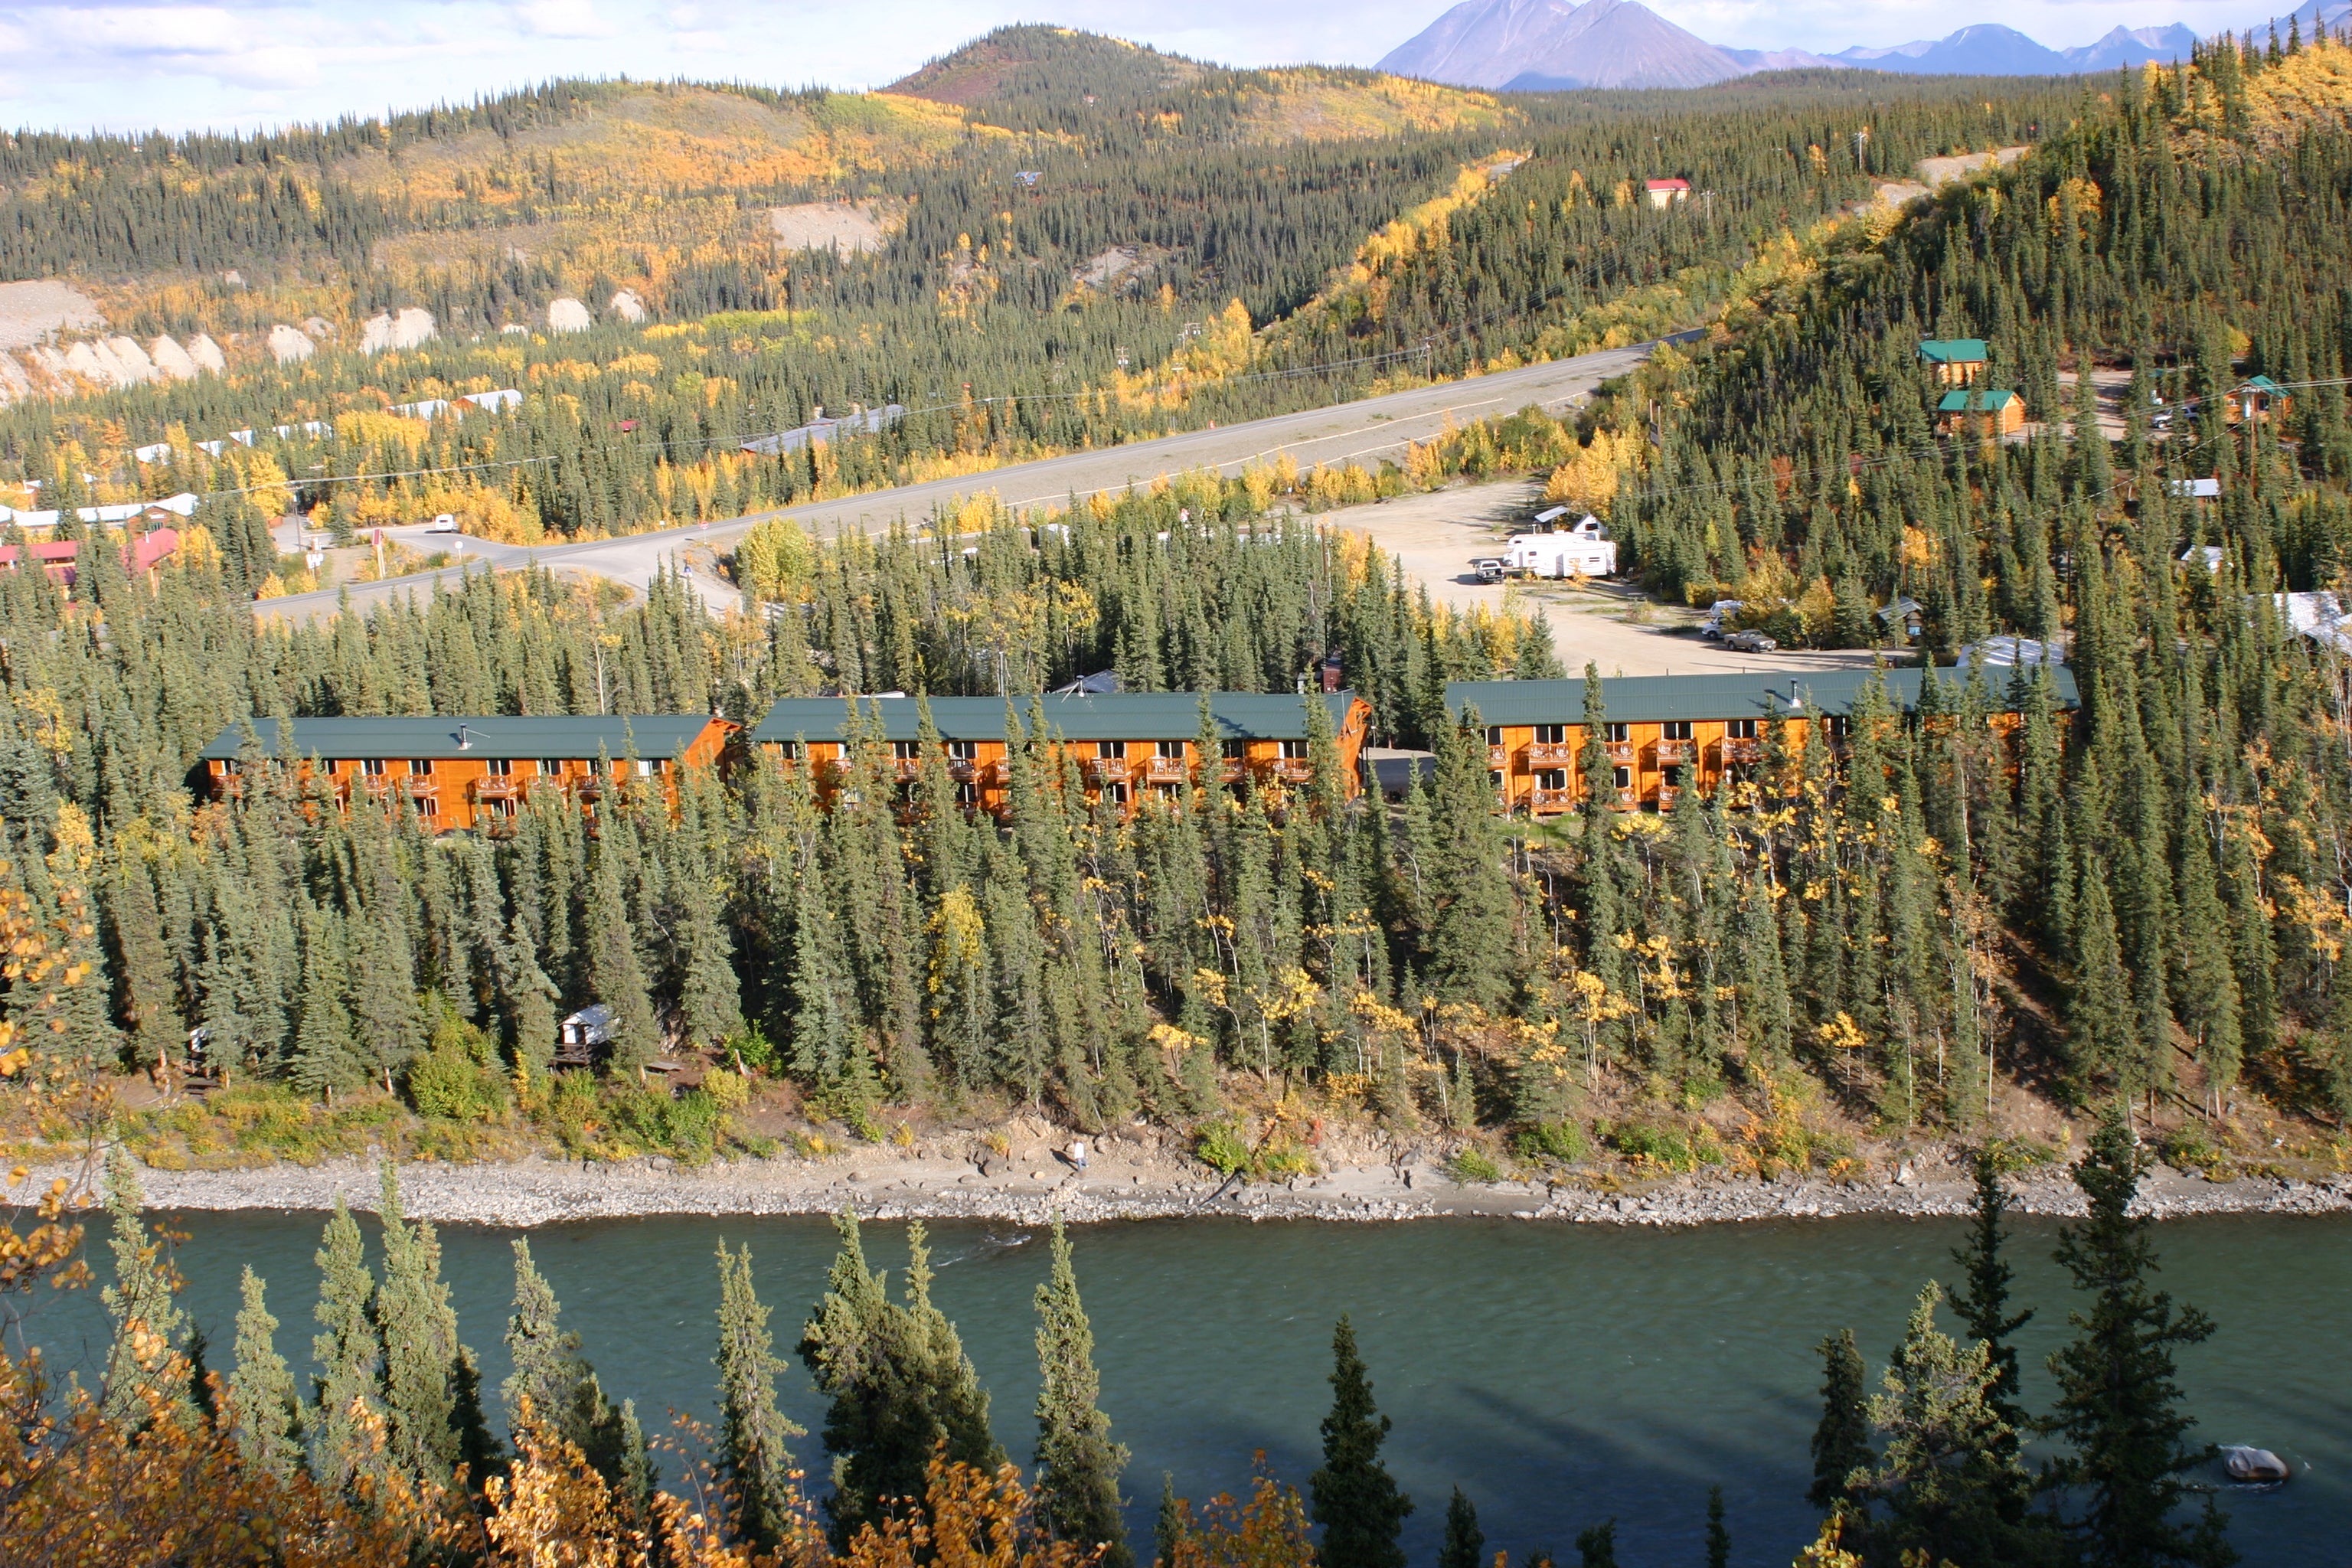 Camper submitted image from Denali Grizzly Bear Resort - 2